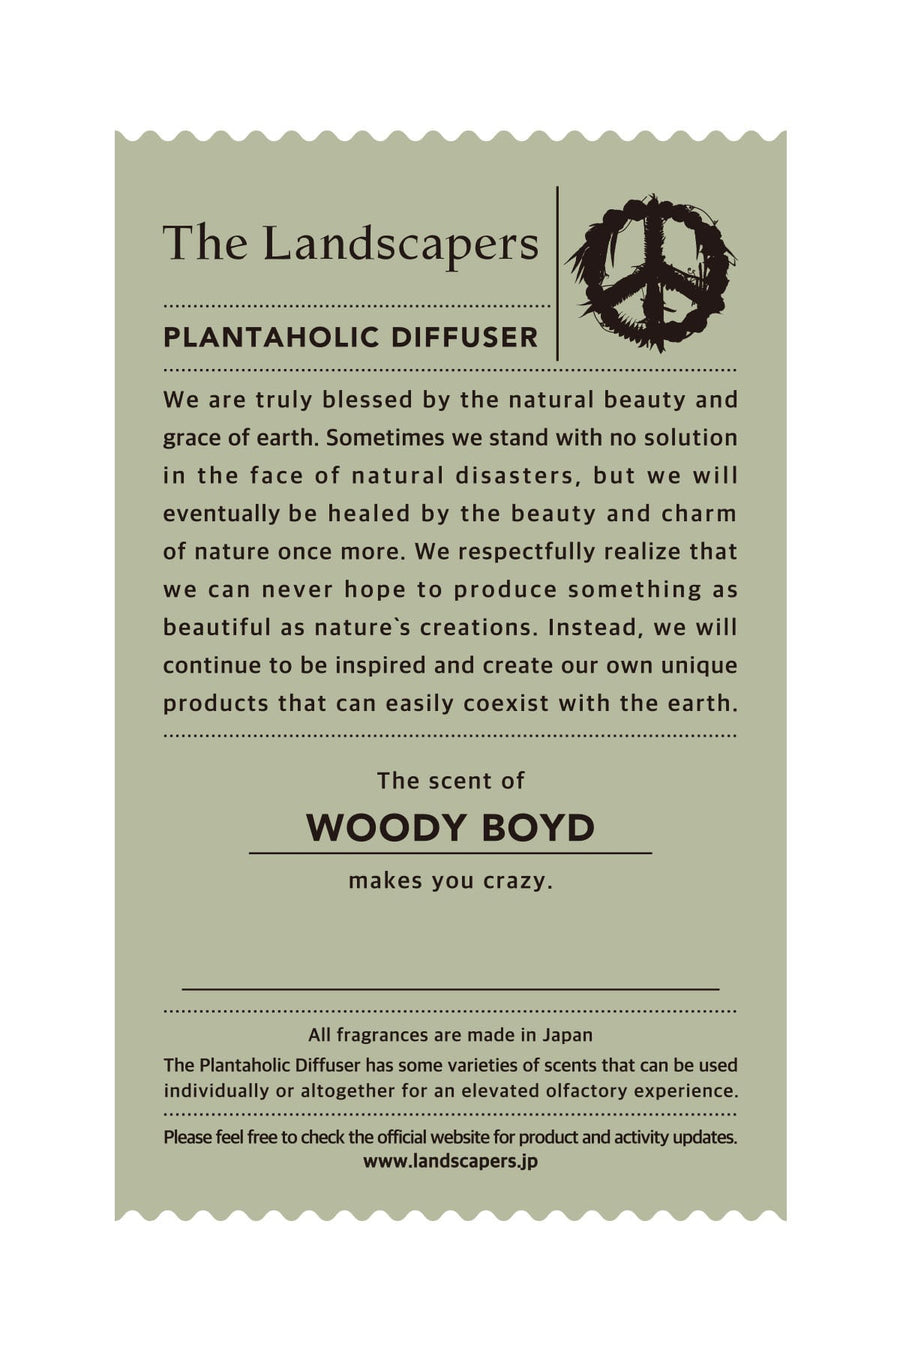 THE LANDSCAPERS -PLANTAHOLIC DIFFUSER TYPE D 01b- Woody Boyd